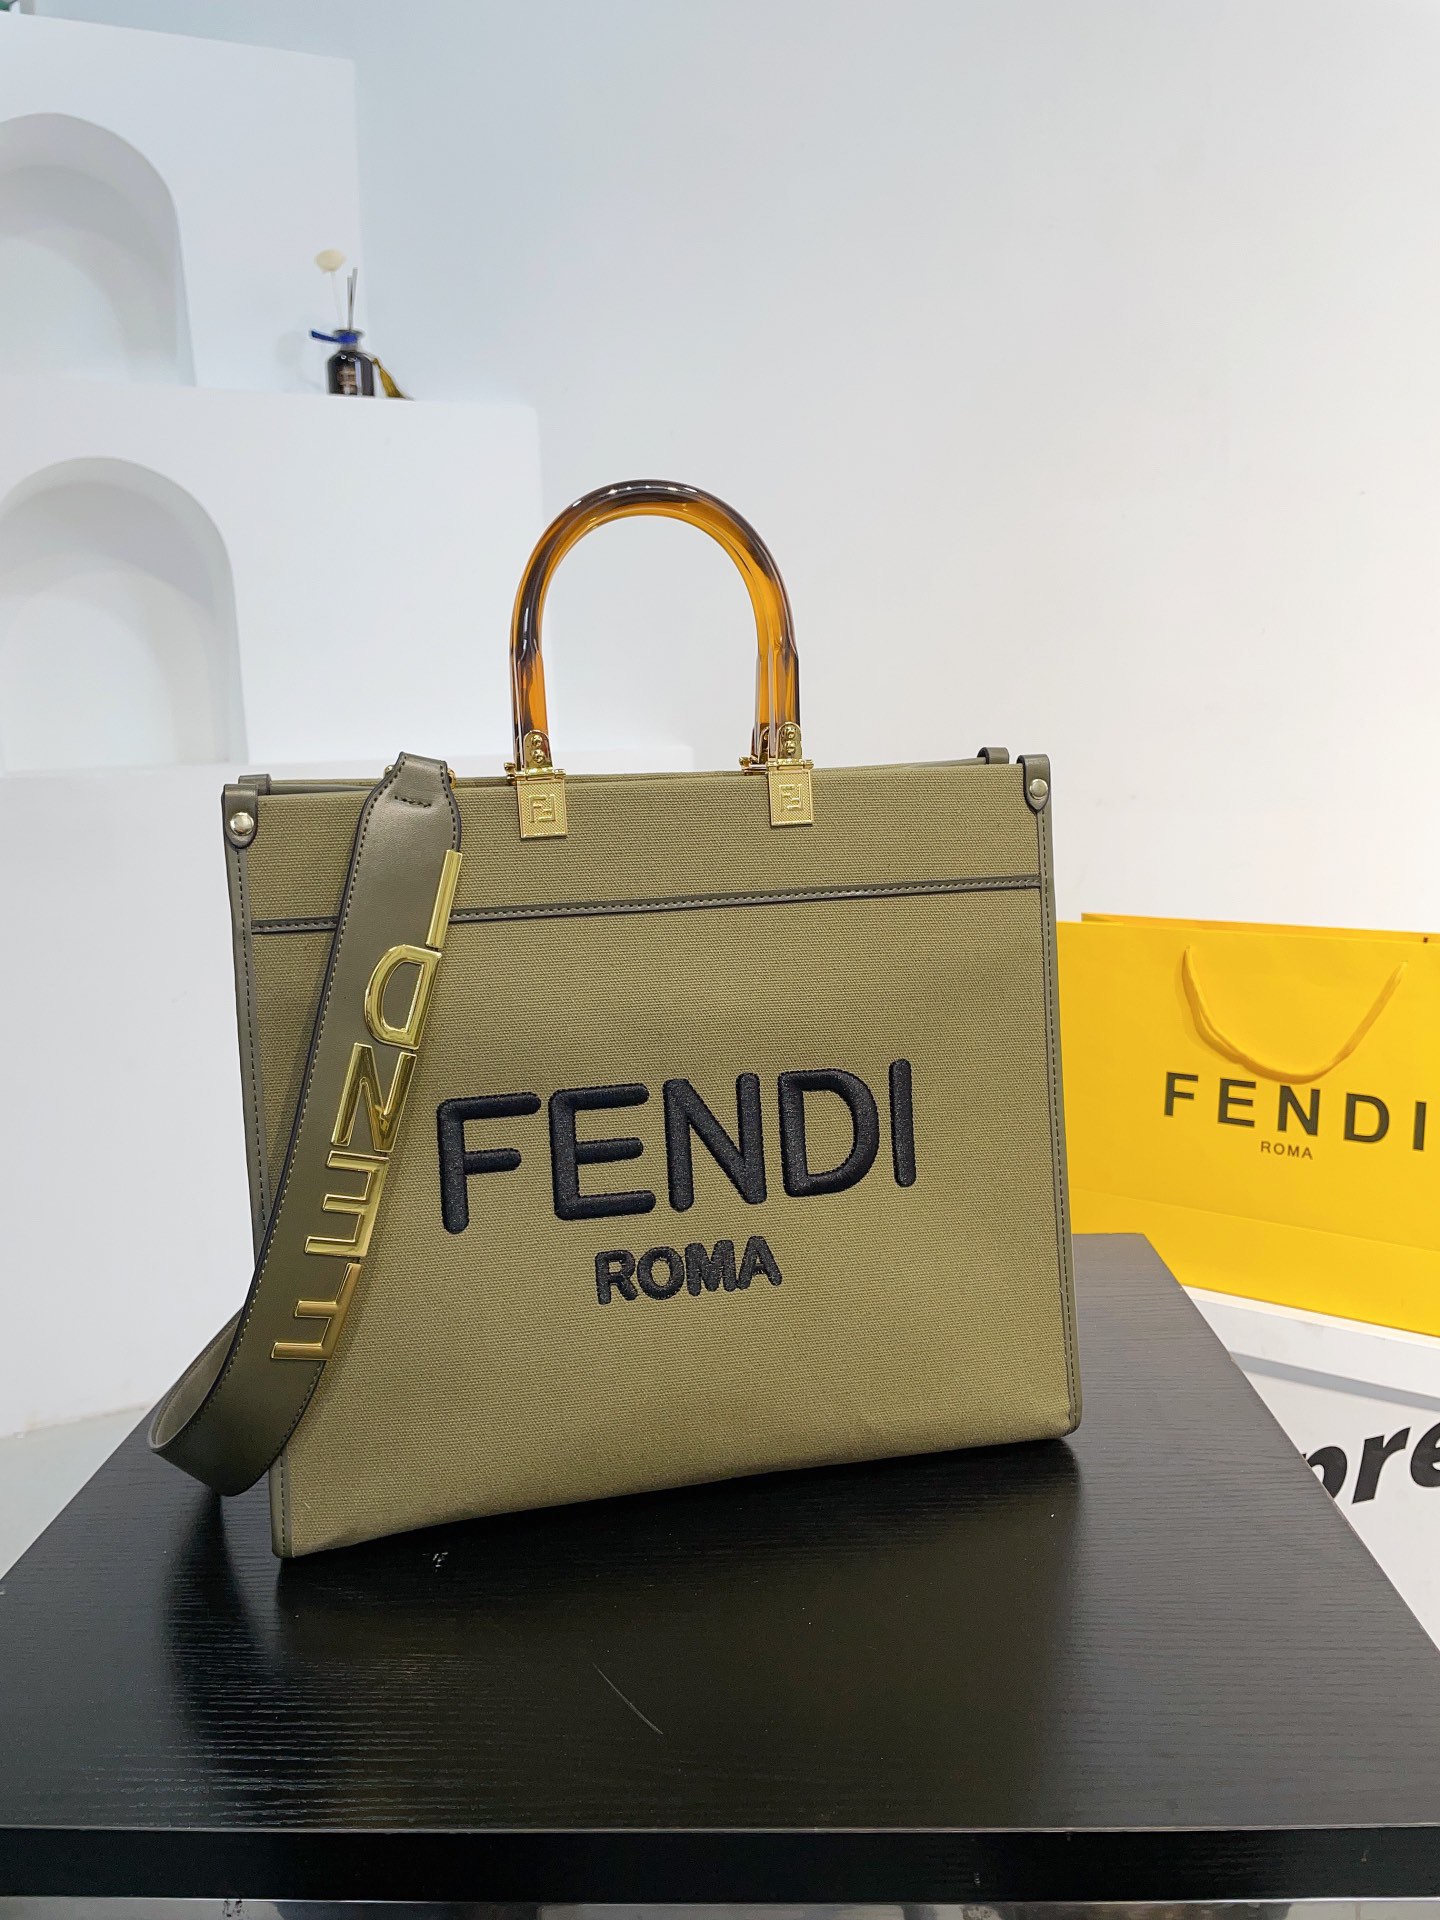 Fendi big big shopping bag! ! It’s a super handsome bag. If you carry it on your back, you’ll be the